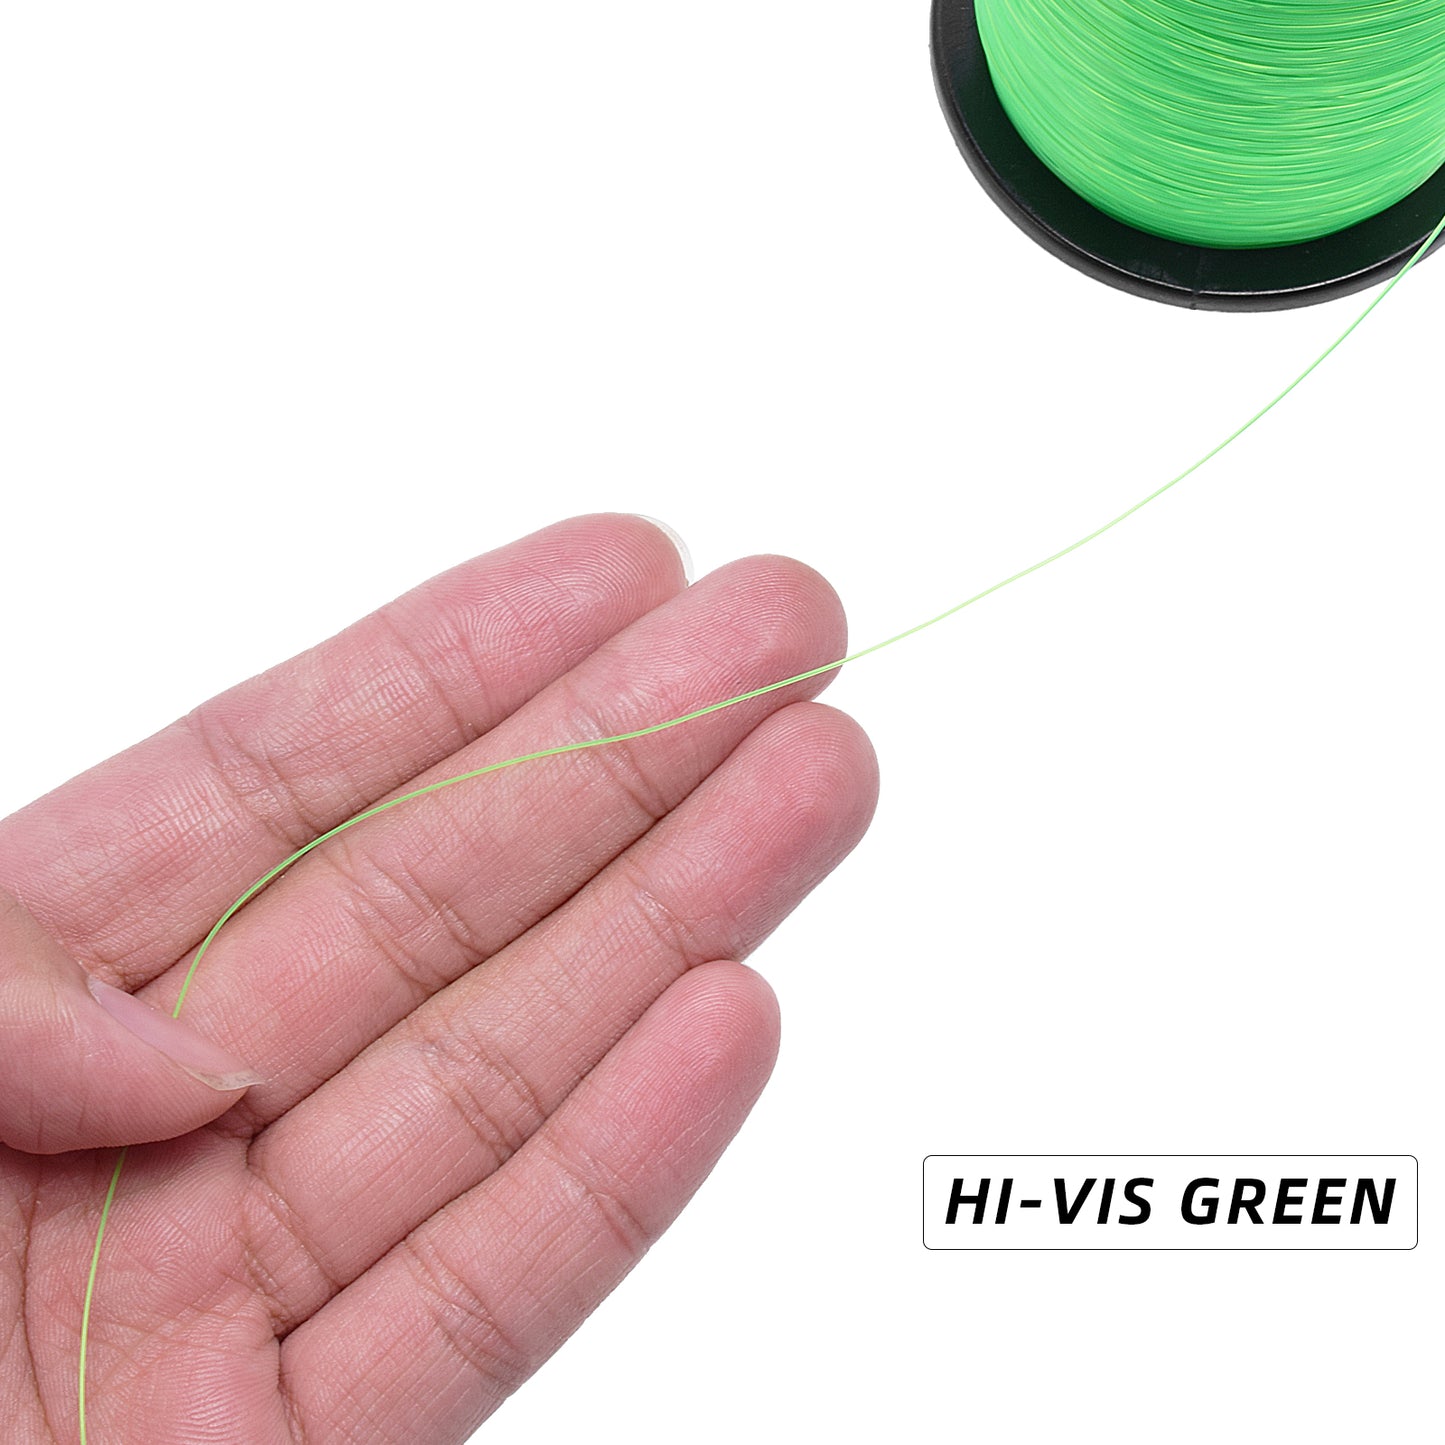 SF Monofilament Fishing Line with Spool 8/10/12/15/20/25/30/40/50/60/80/100LB Clear/Green